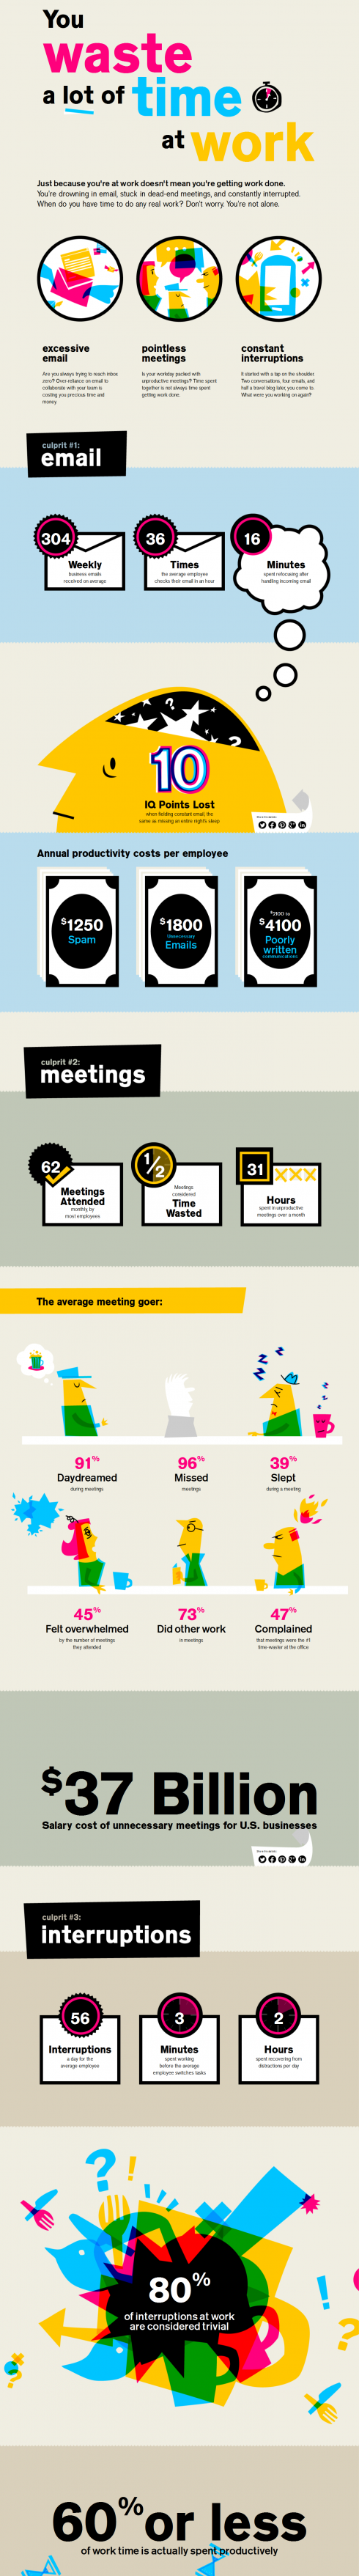 You-Waste-A-Lot-Of-Time-At-Work-infographic-e1346948295277